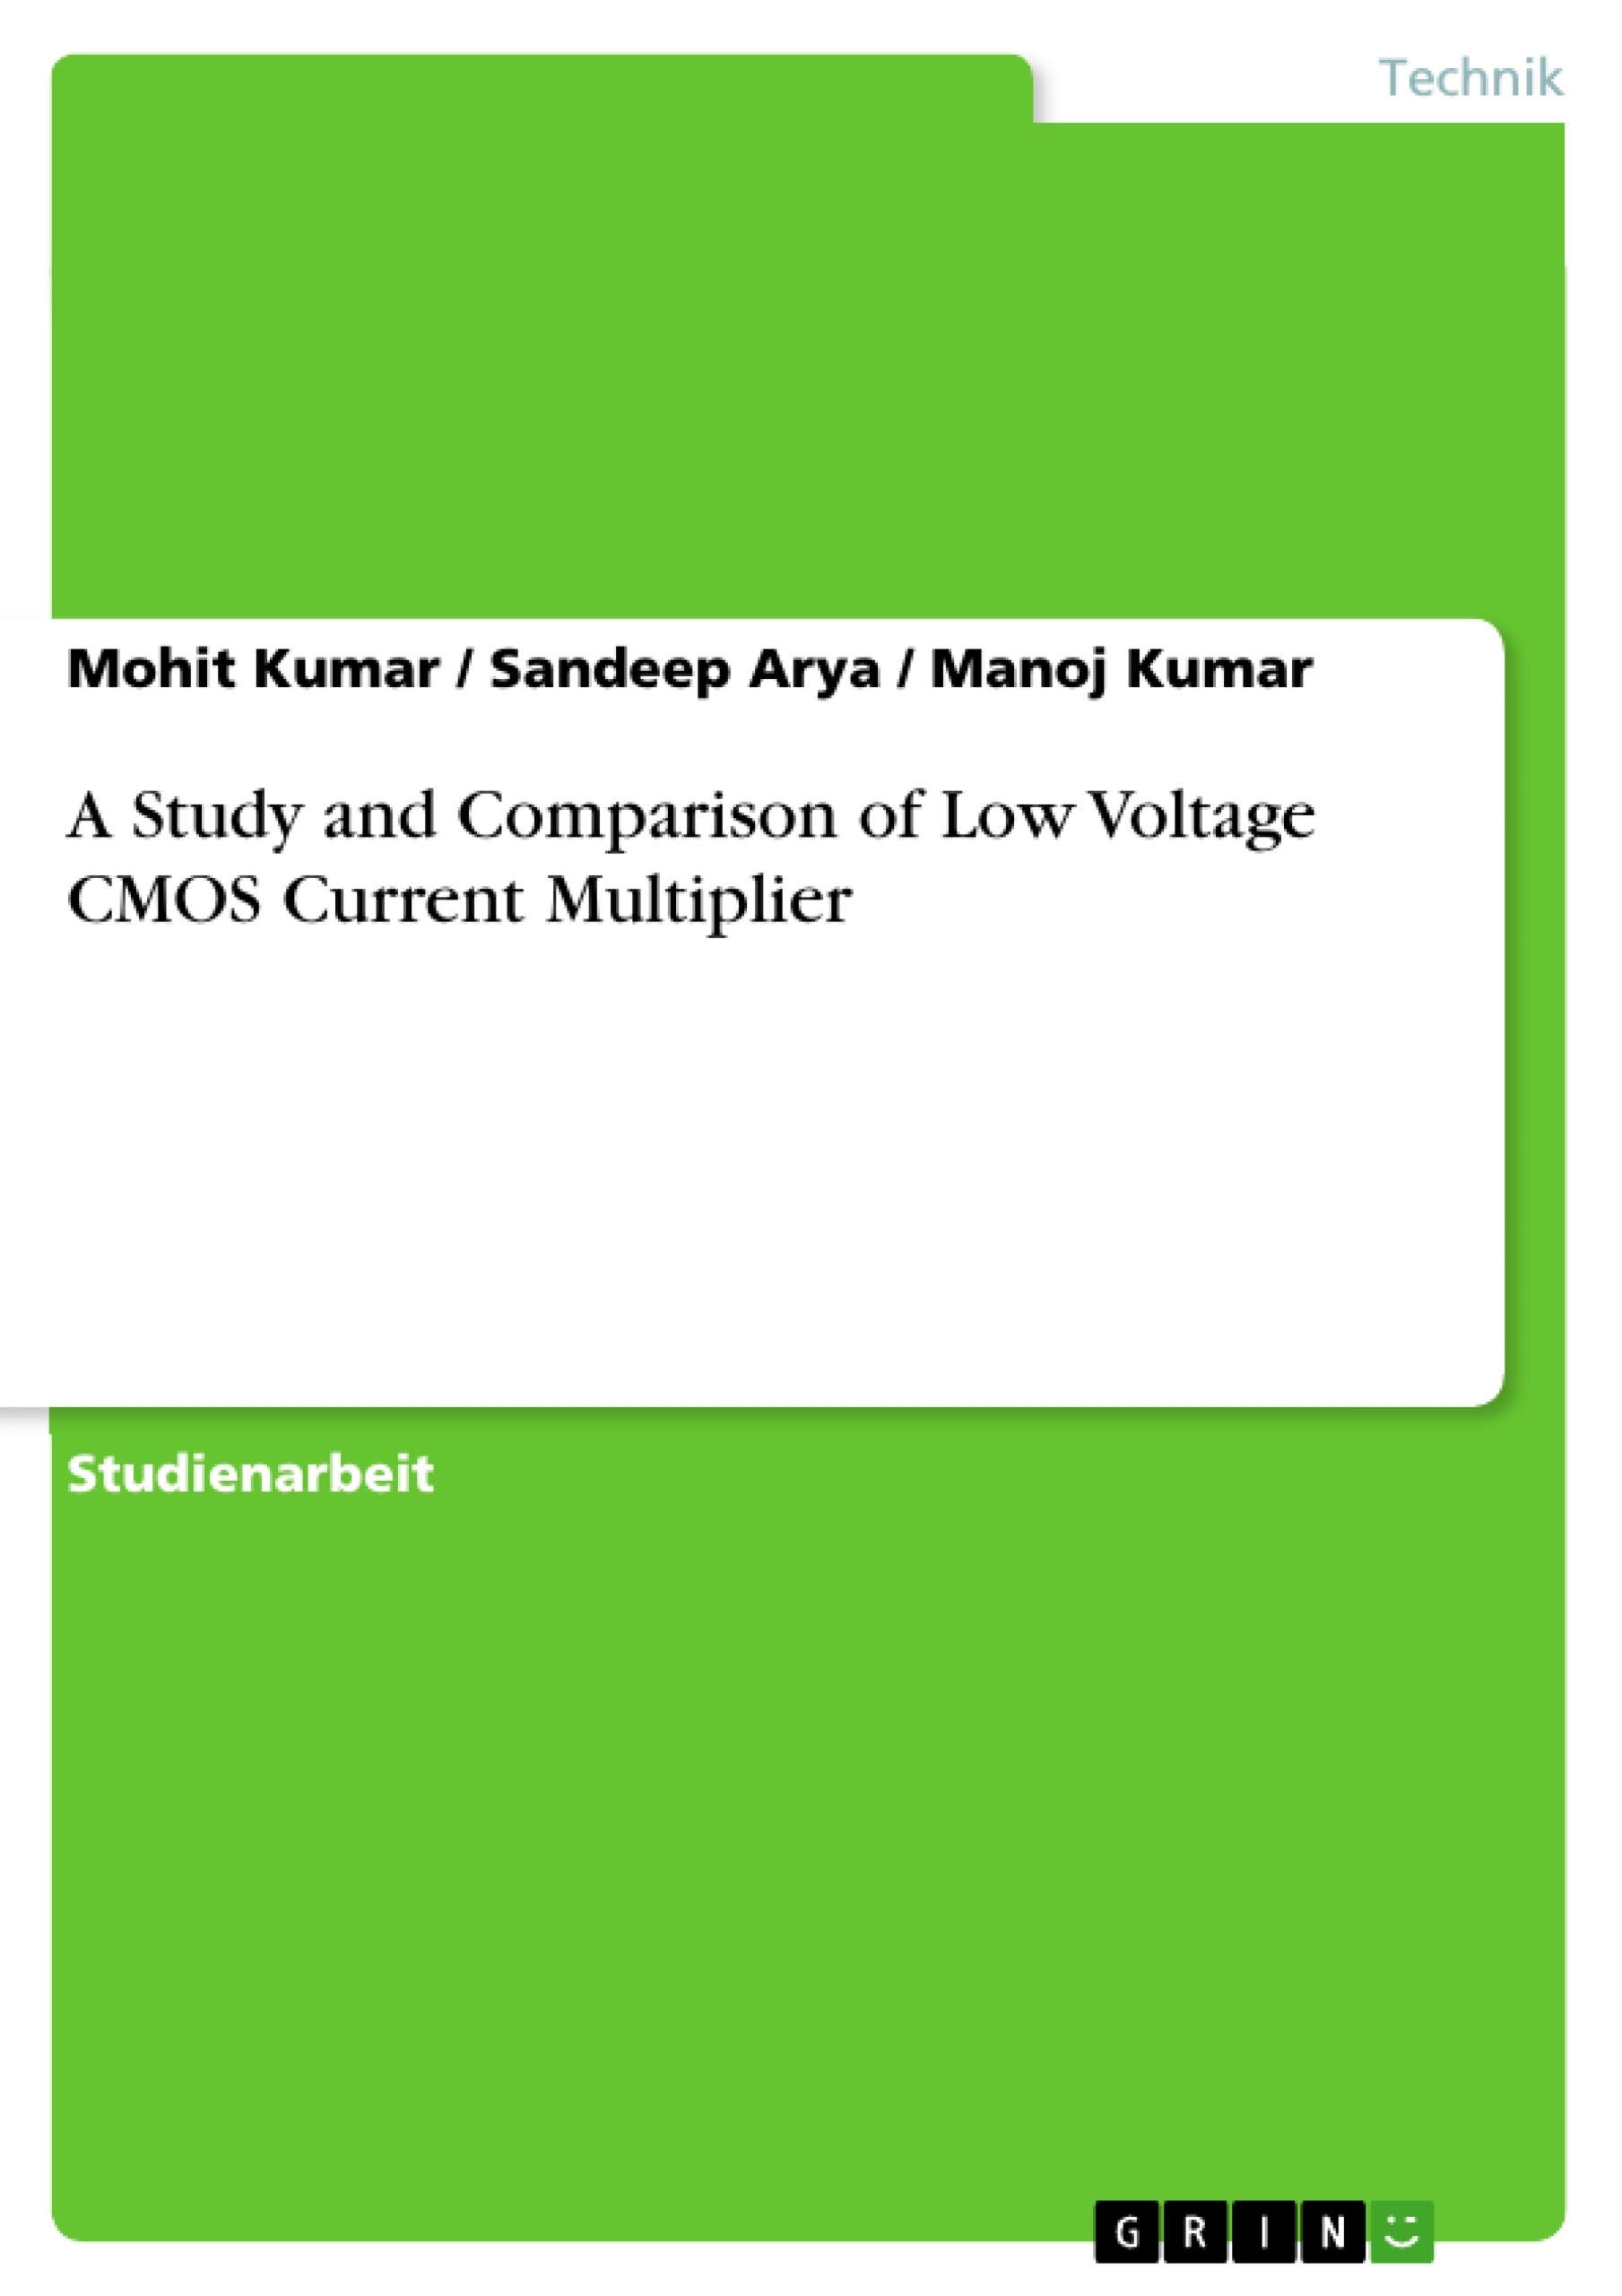 Titel: A Study and Comparison of Low Voltage CMOS Current Multiplier